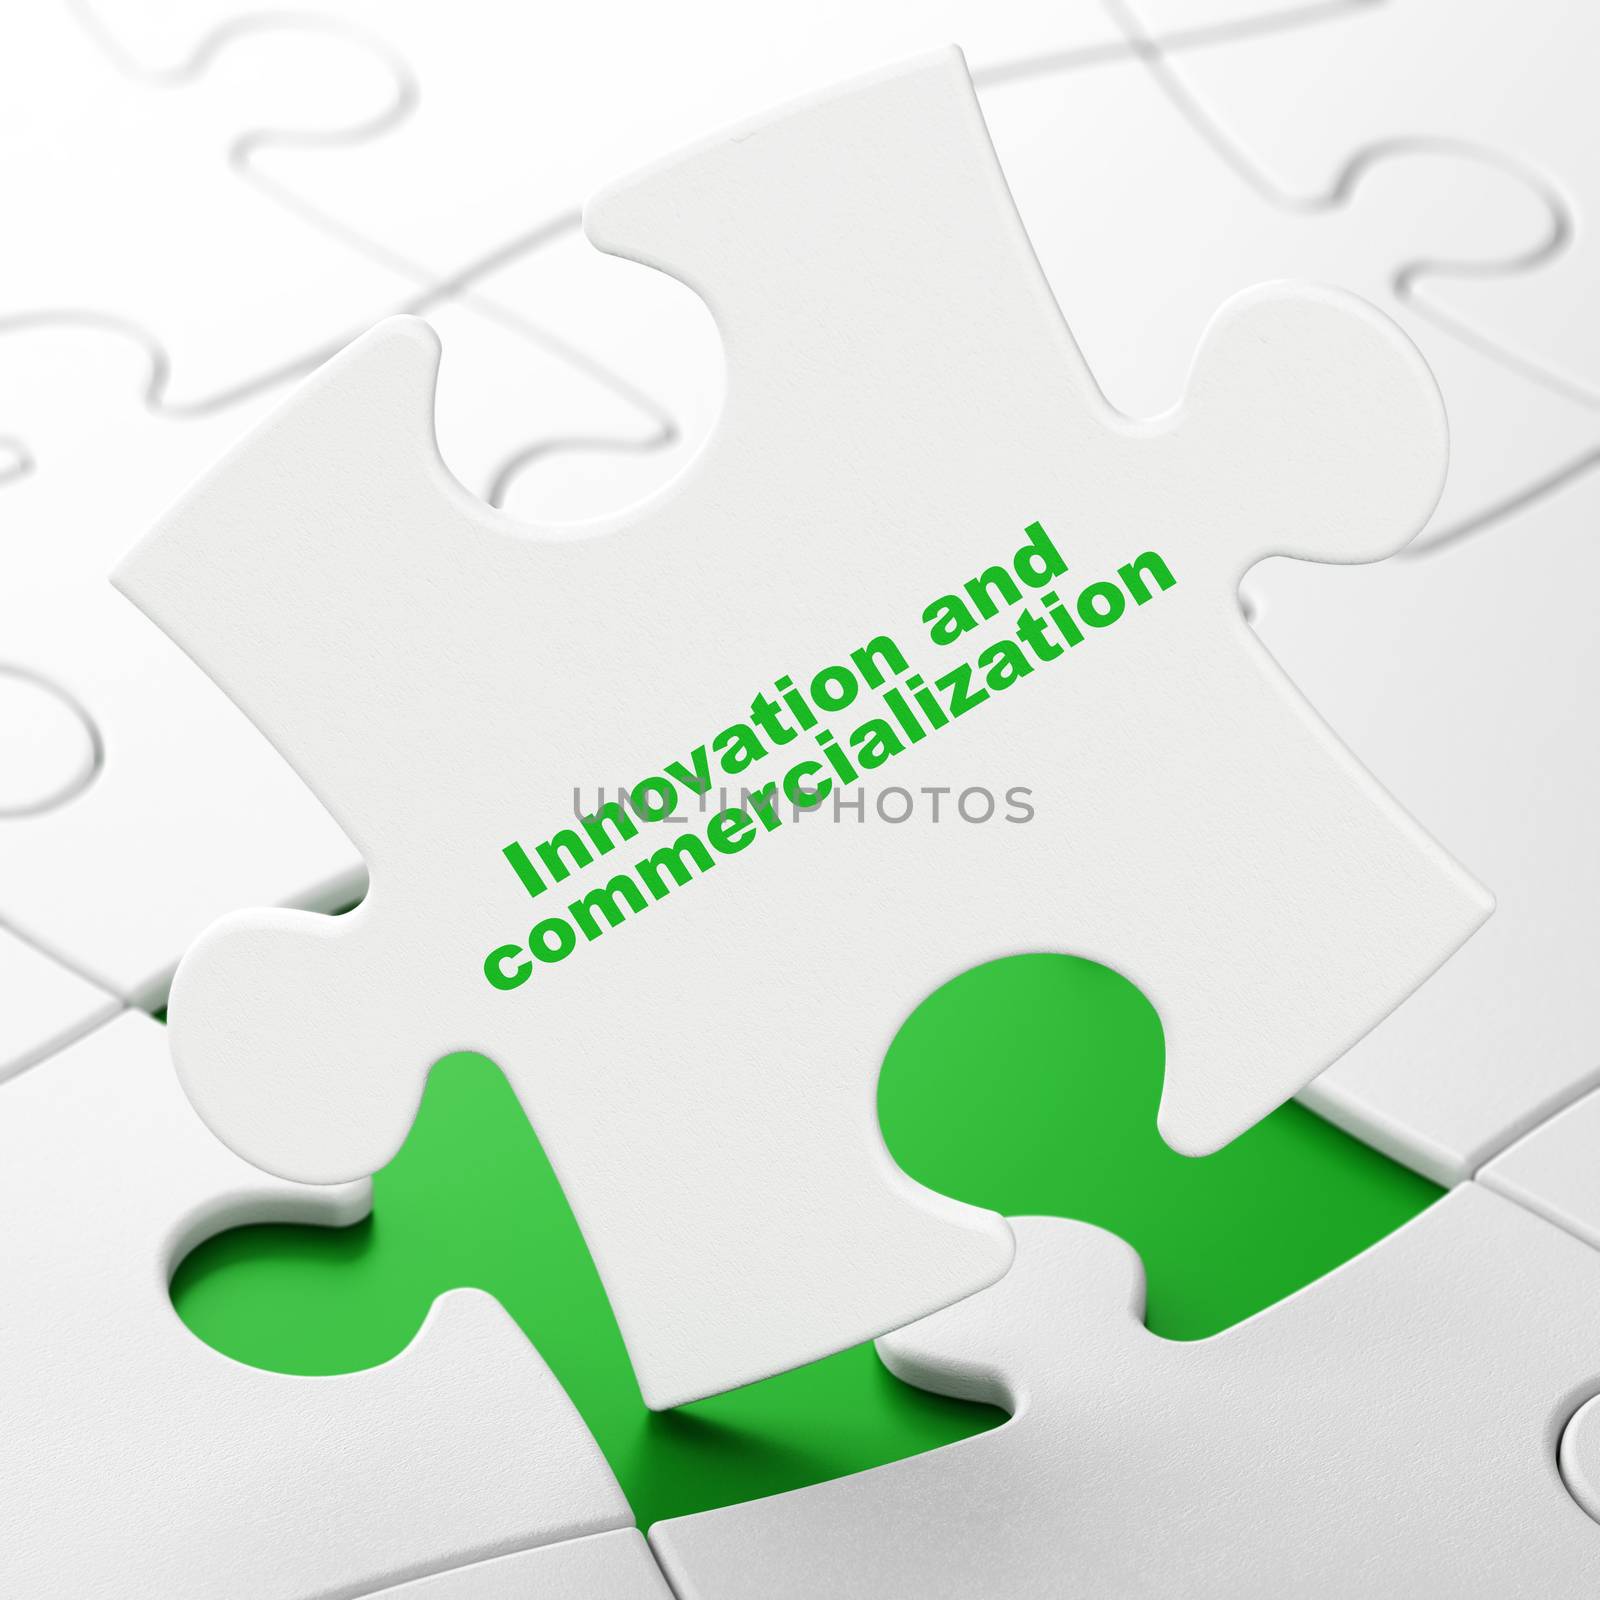 Science concept: Innovation And Commercialization on White puzzle pieces background, 3D rendering